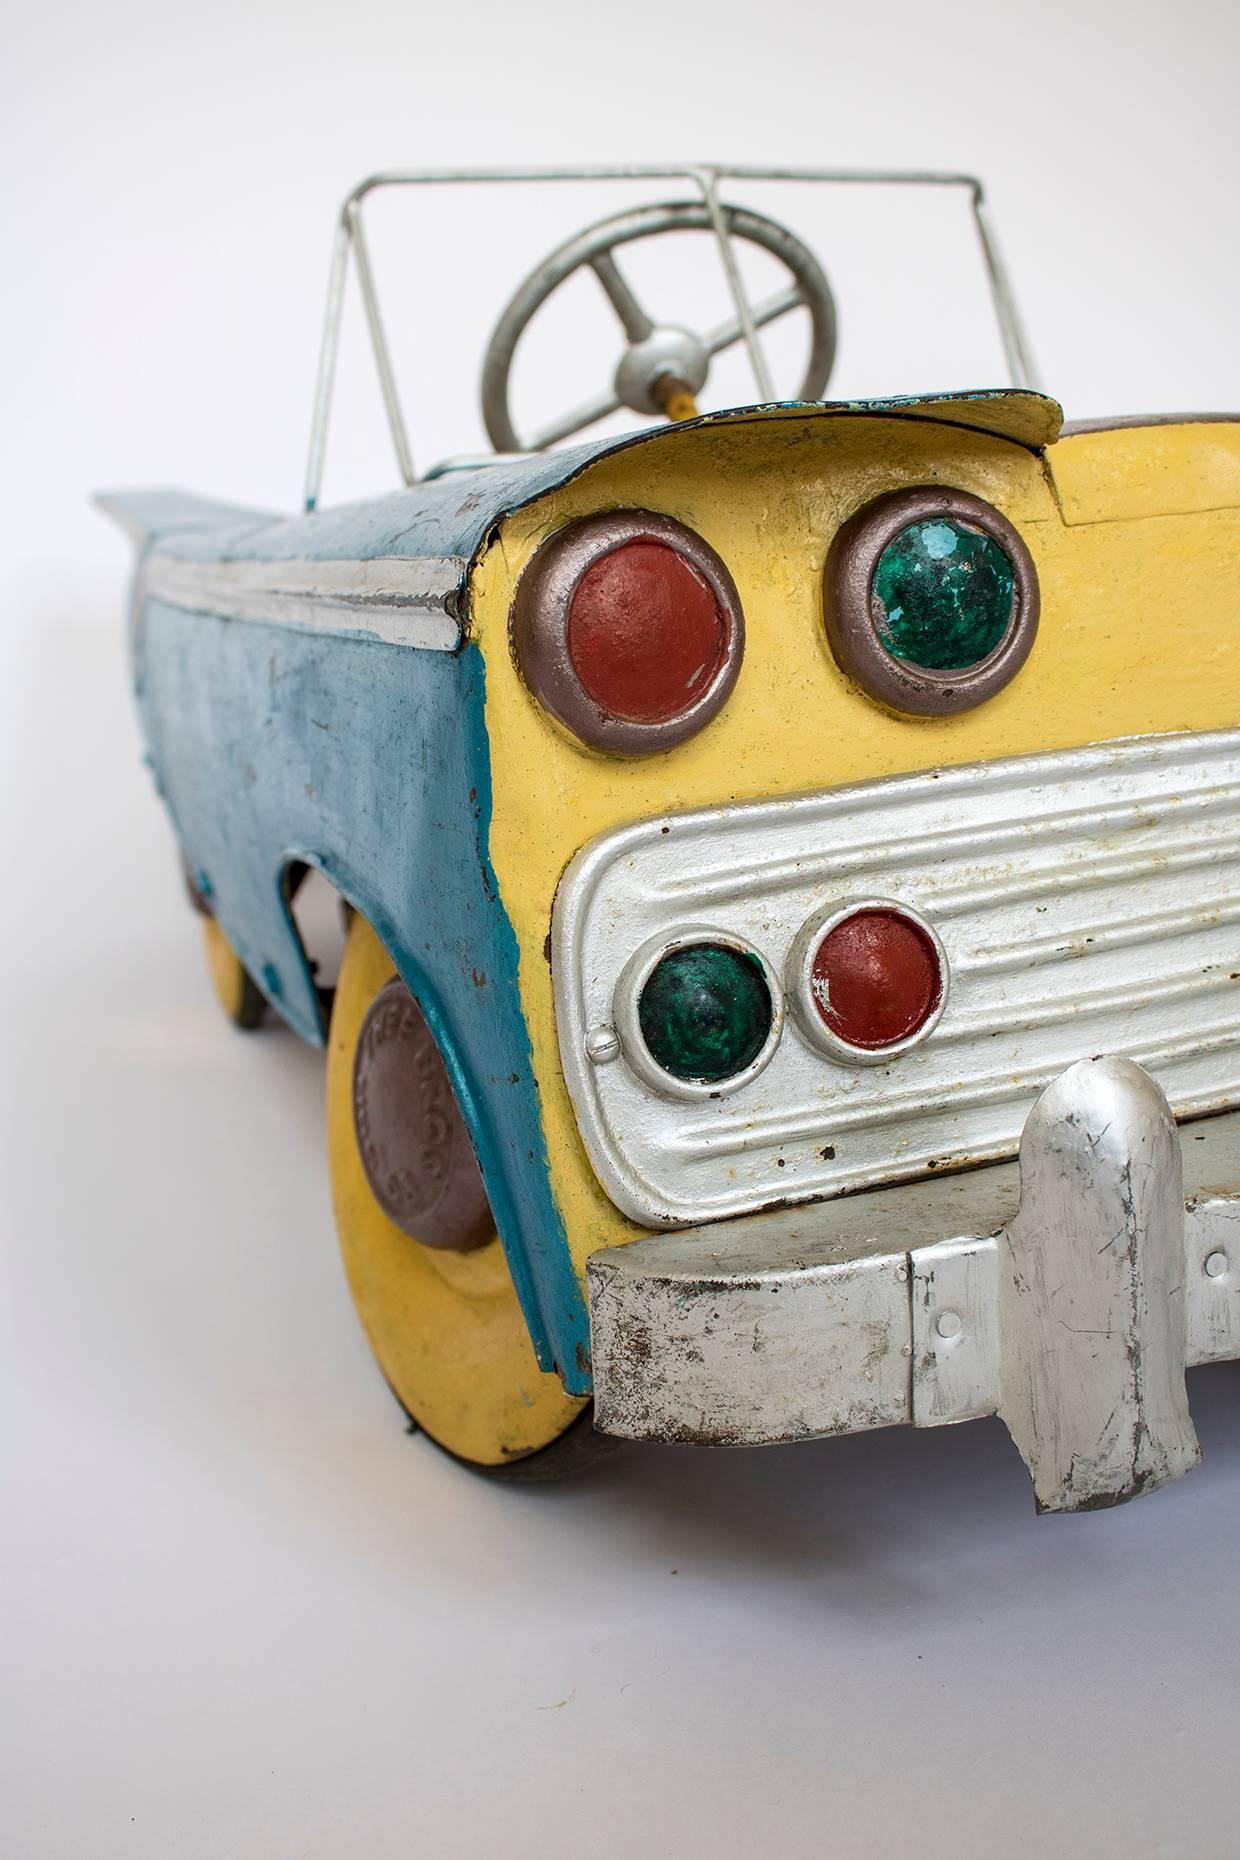 Unusual Burmese Painted Model Pedal Car, circa 1950s -1960s Childs Toy im Angebot 2